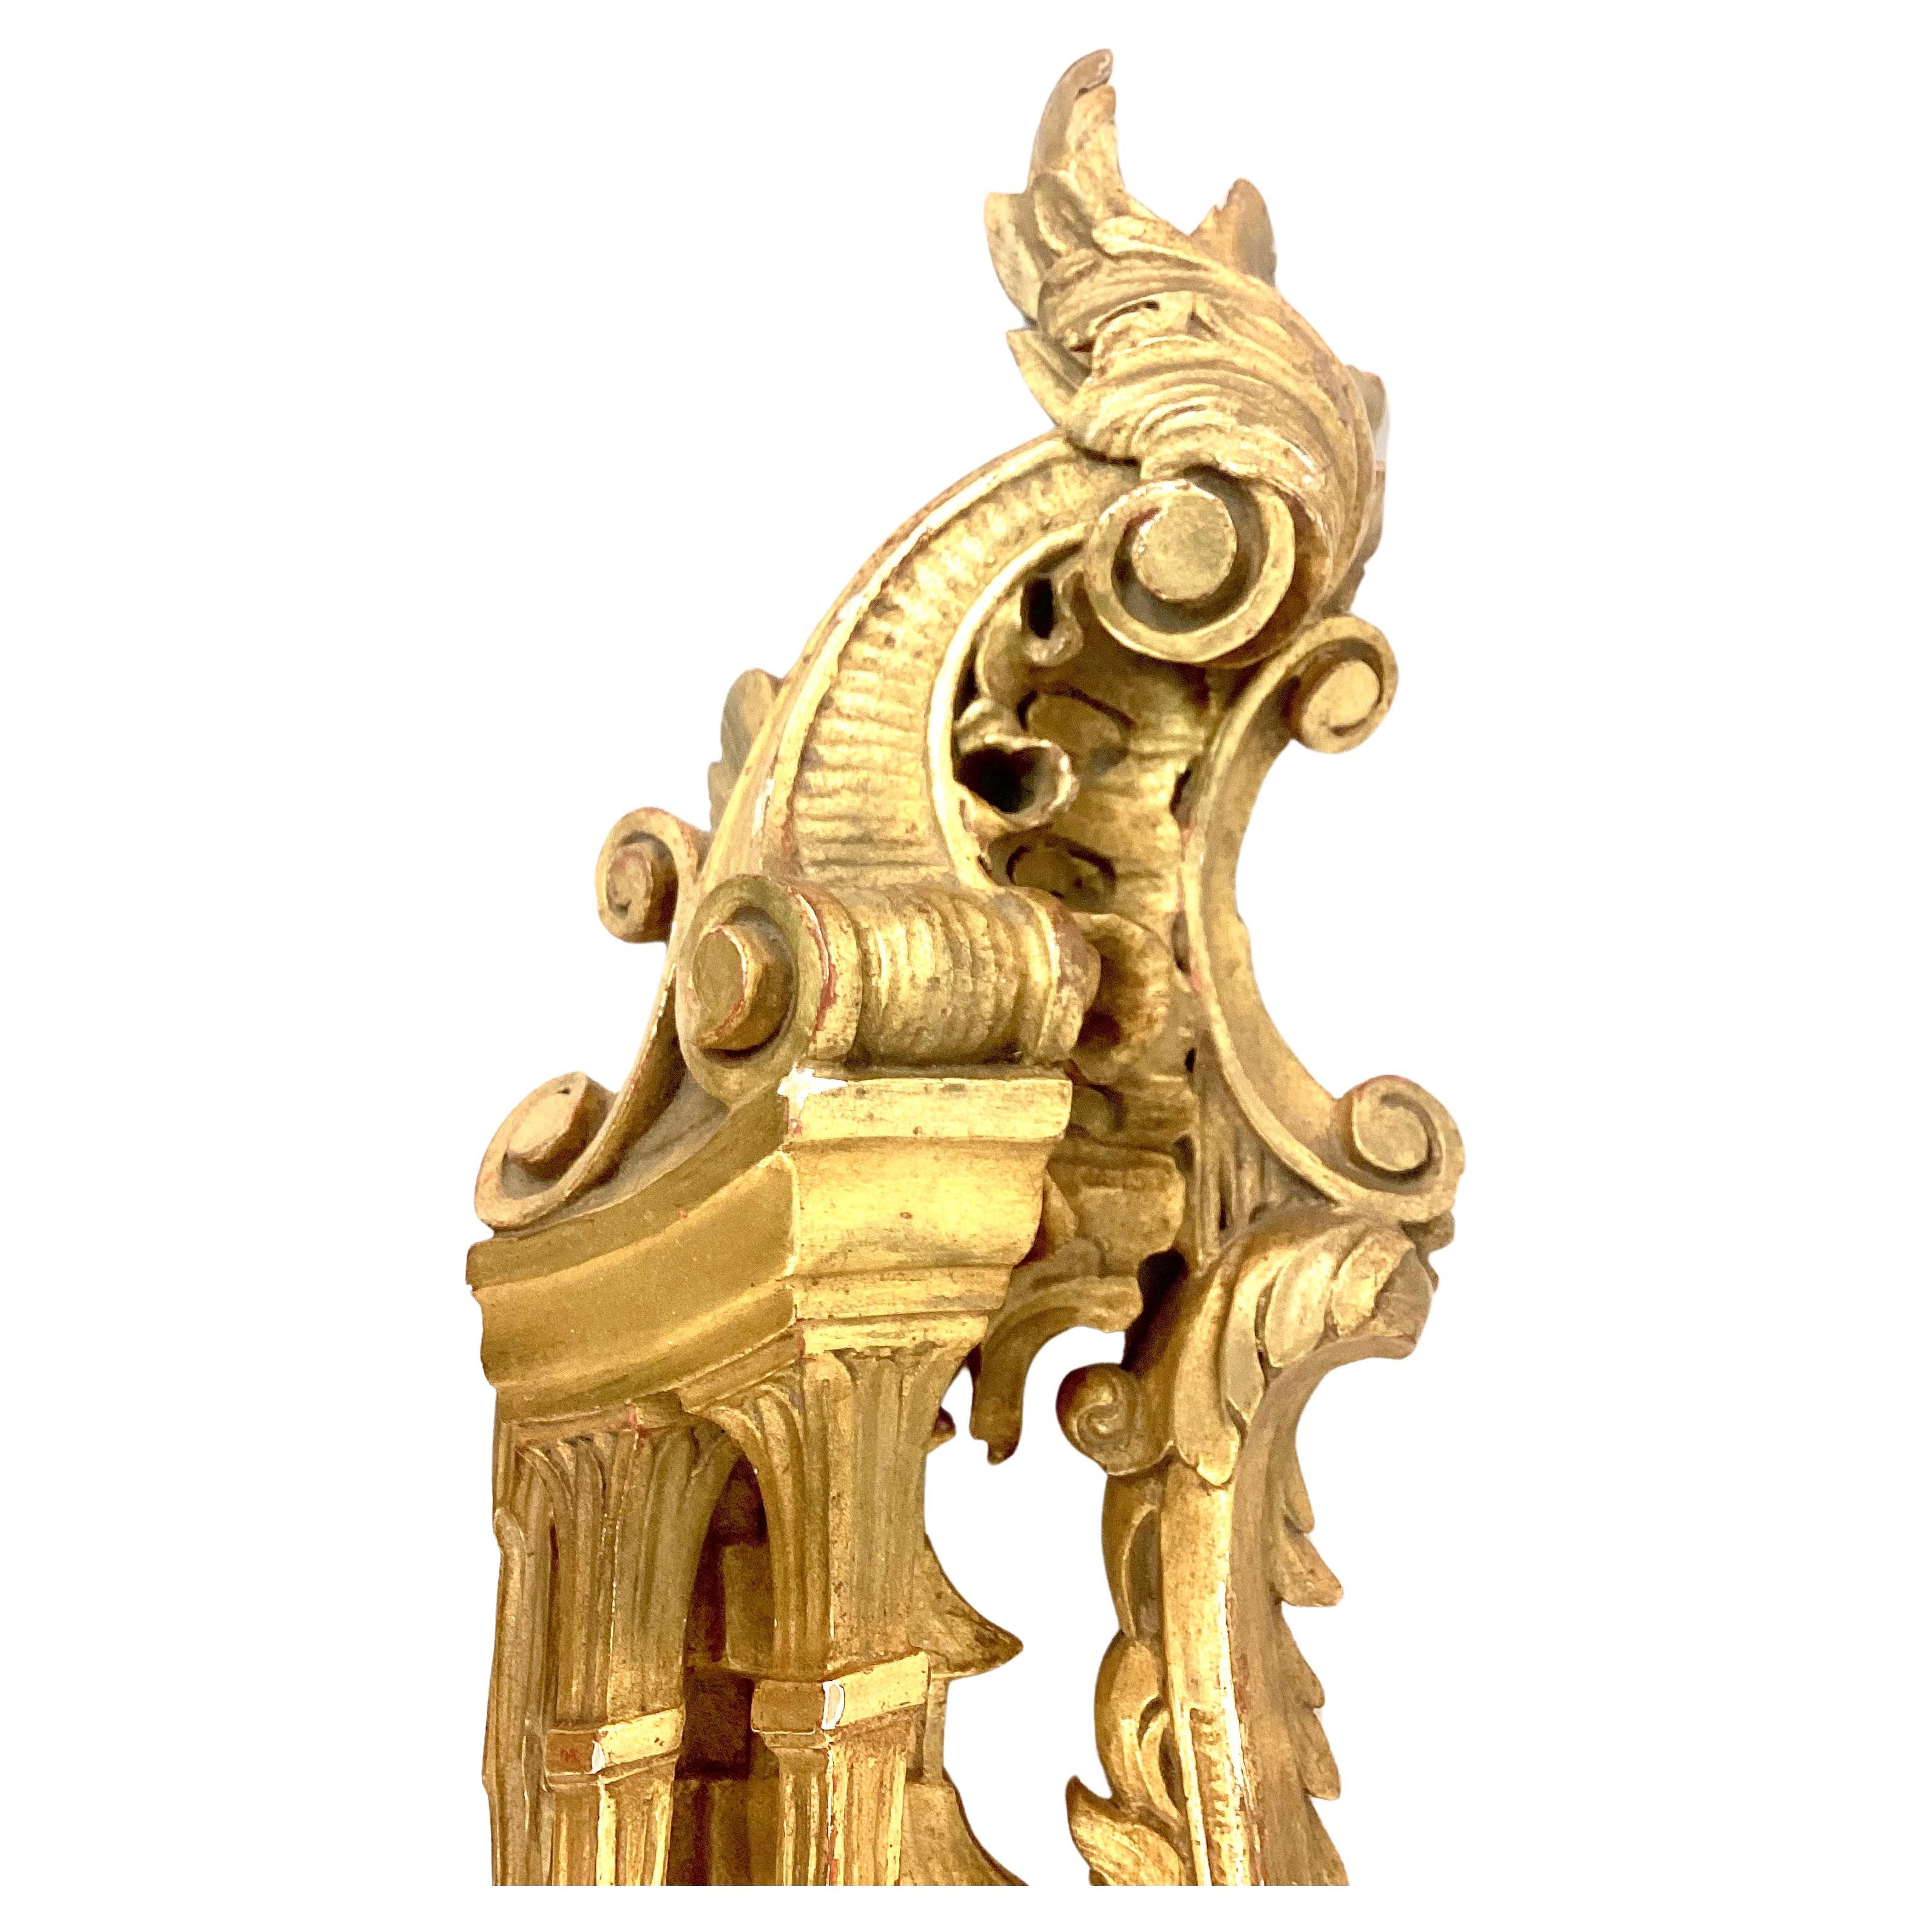 19th century Chinese Chippendale giltwood architectural fragment. Piece is made up of leaves and scroll motif with Chinese accents in center. Intricately hand-carved. Fitted with a hanger on back.